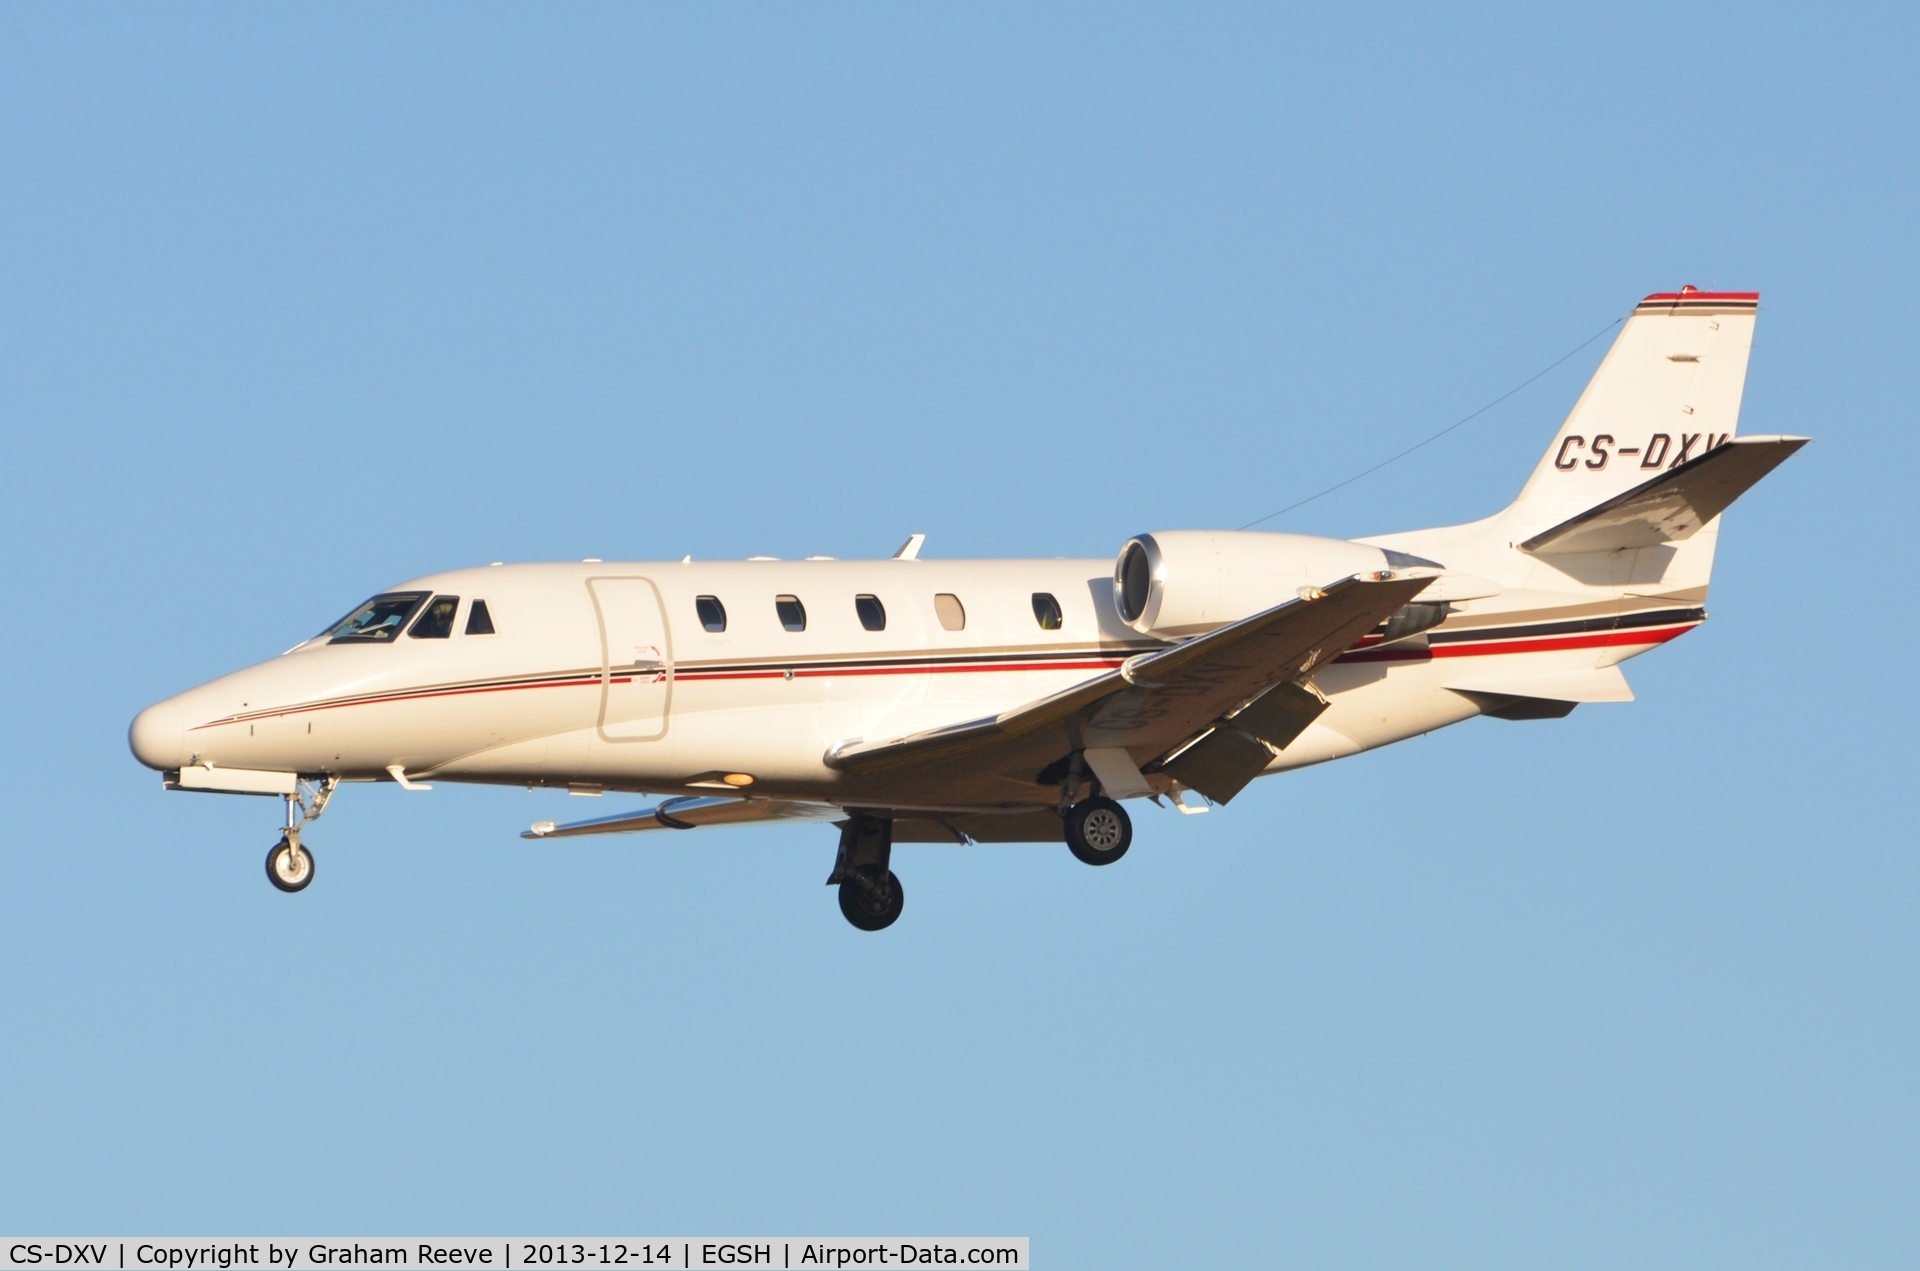 CS-DXV, 2008 Cessna 560 Citation XLS C/N 560-5782, About to land at Norwich.